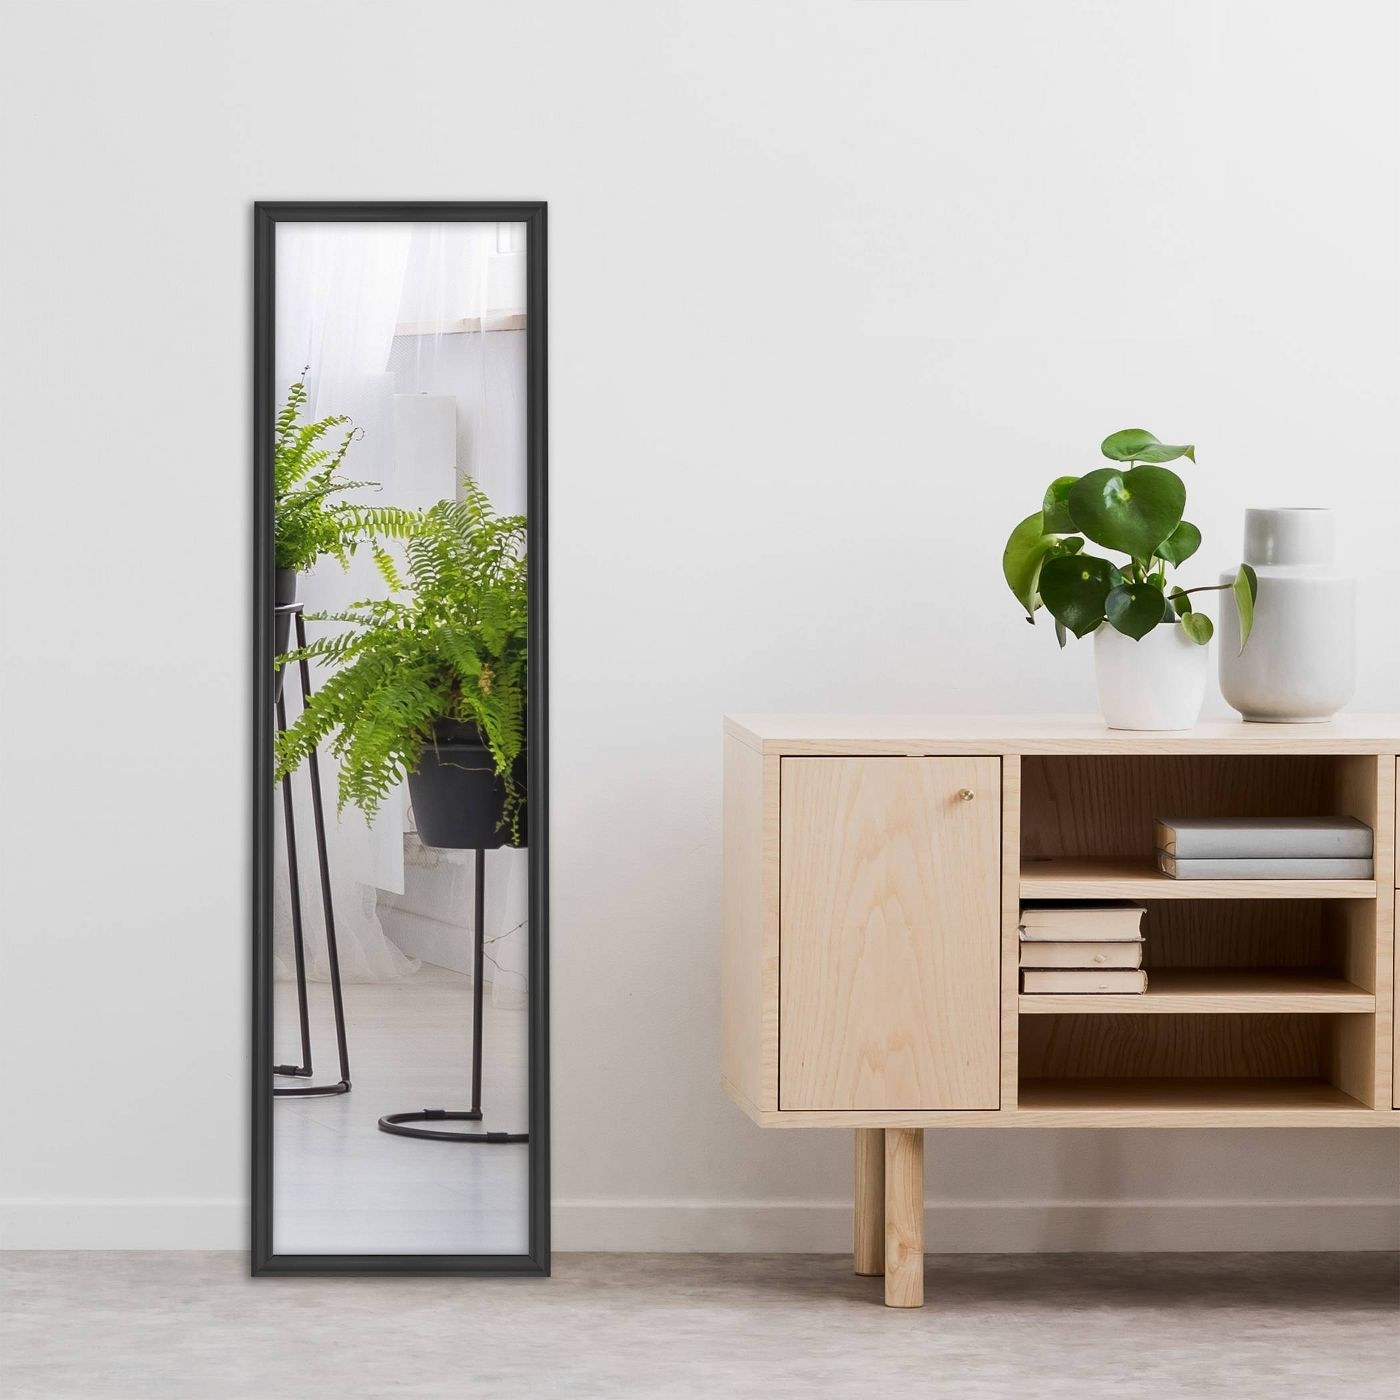 A blacked framed full length mirror leaning against a wall next to a console table